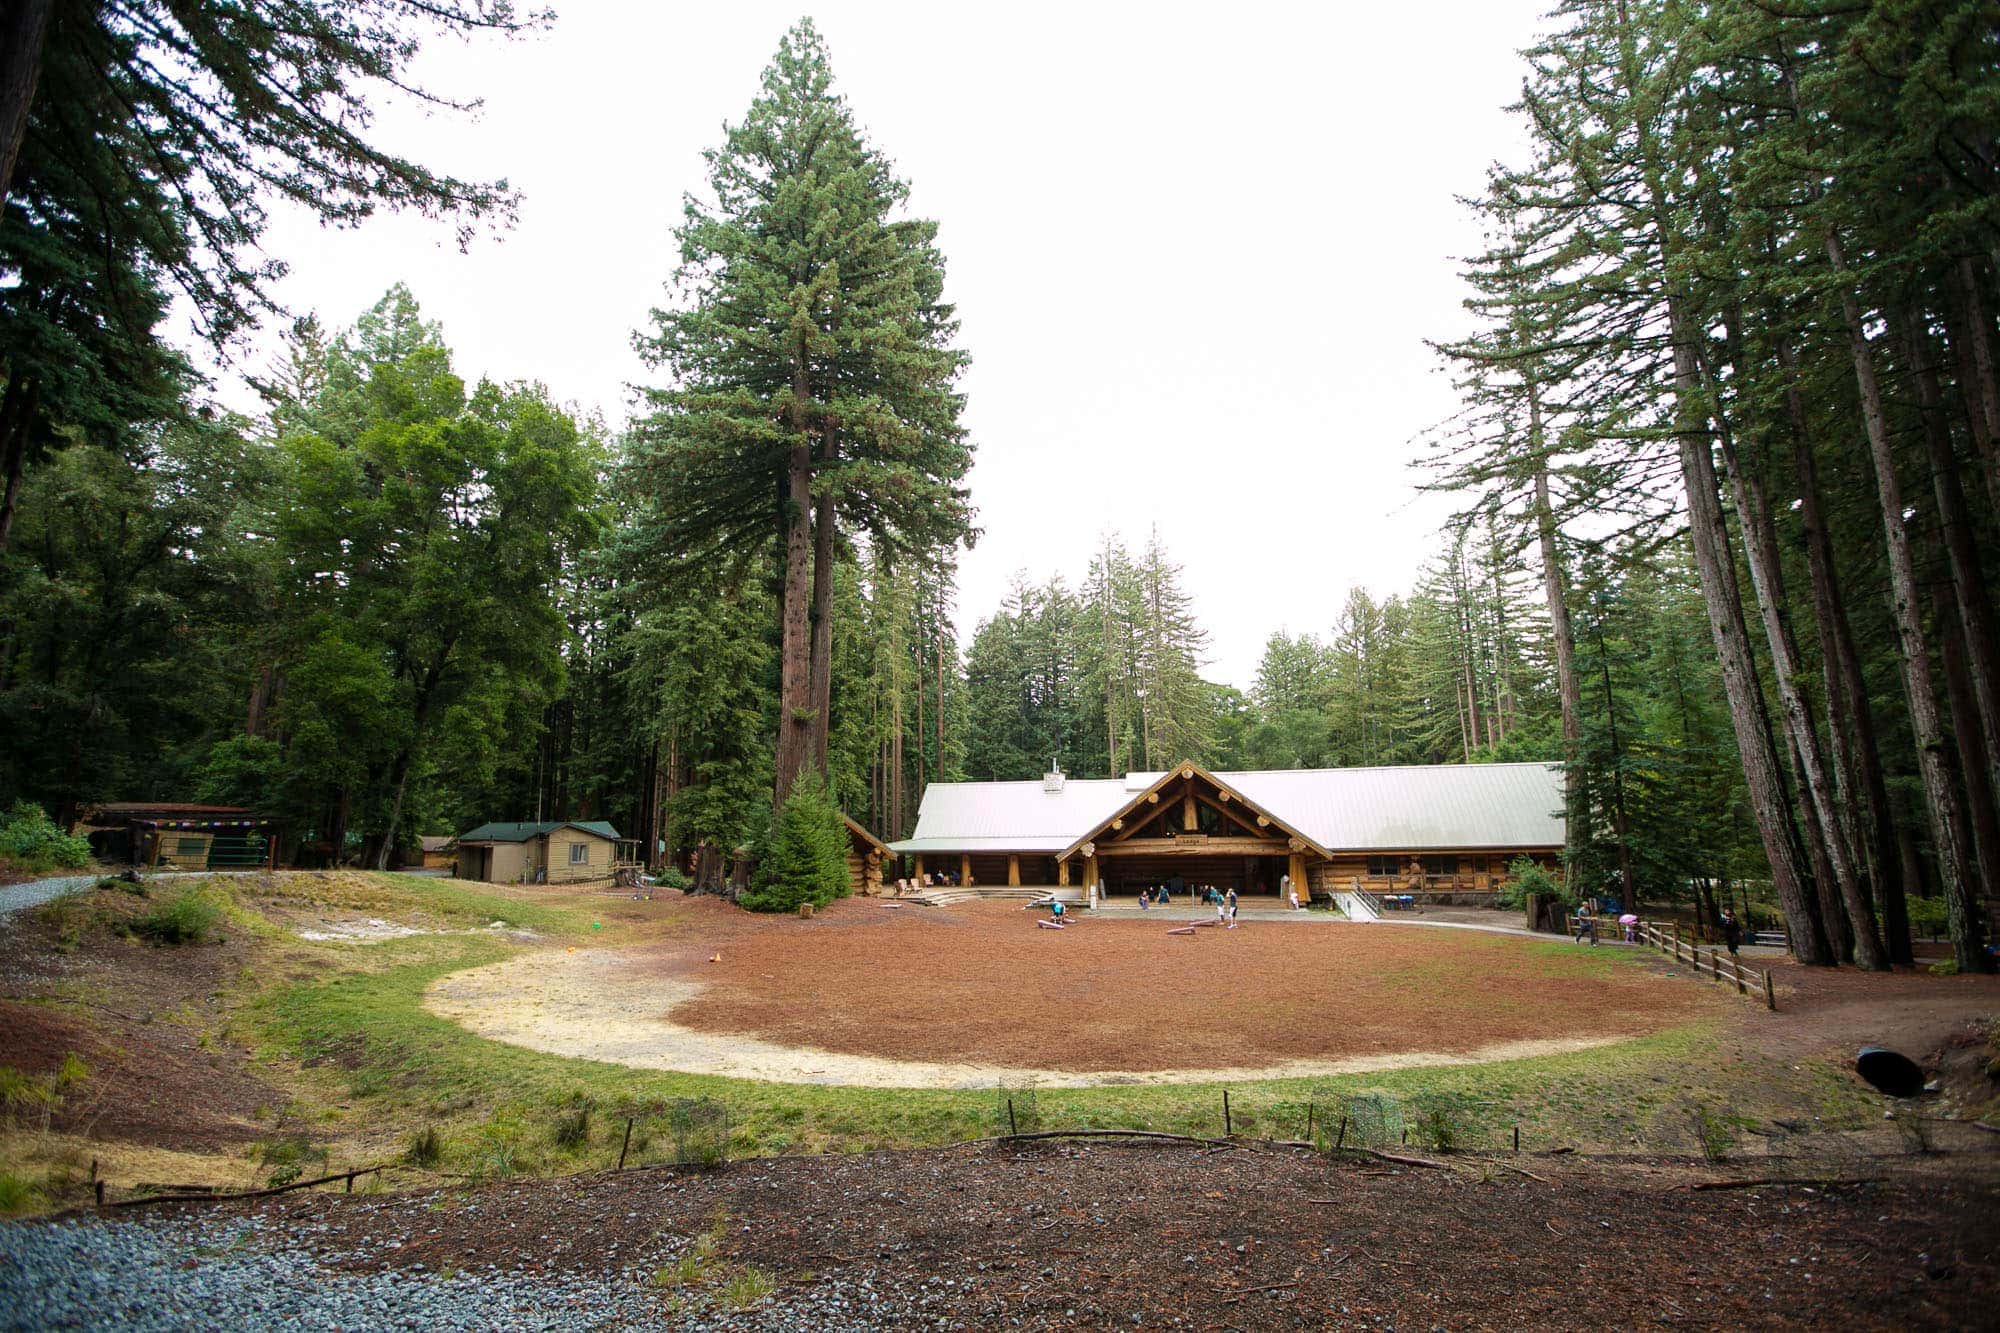 View of the lodge at the YMCA camp campbell